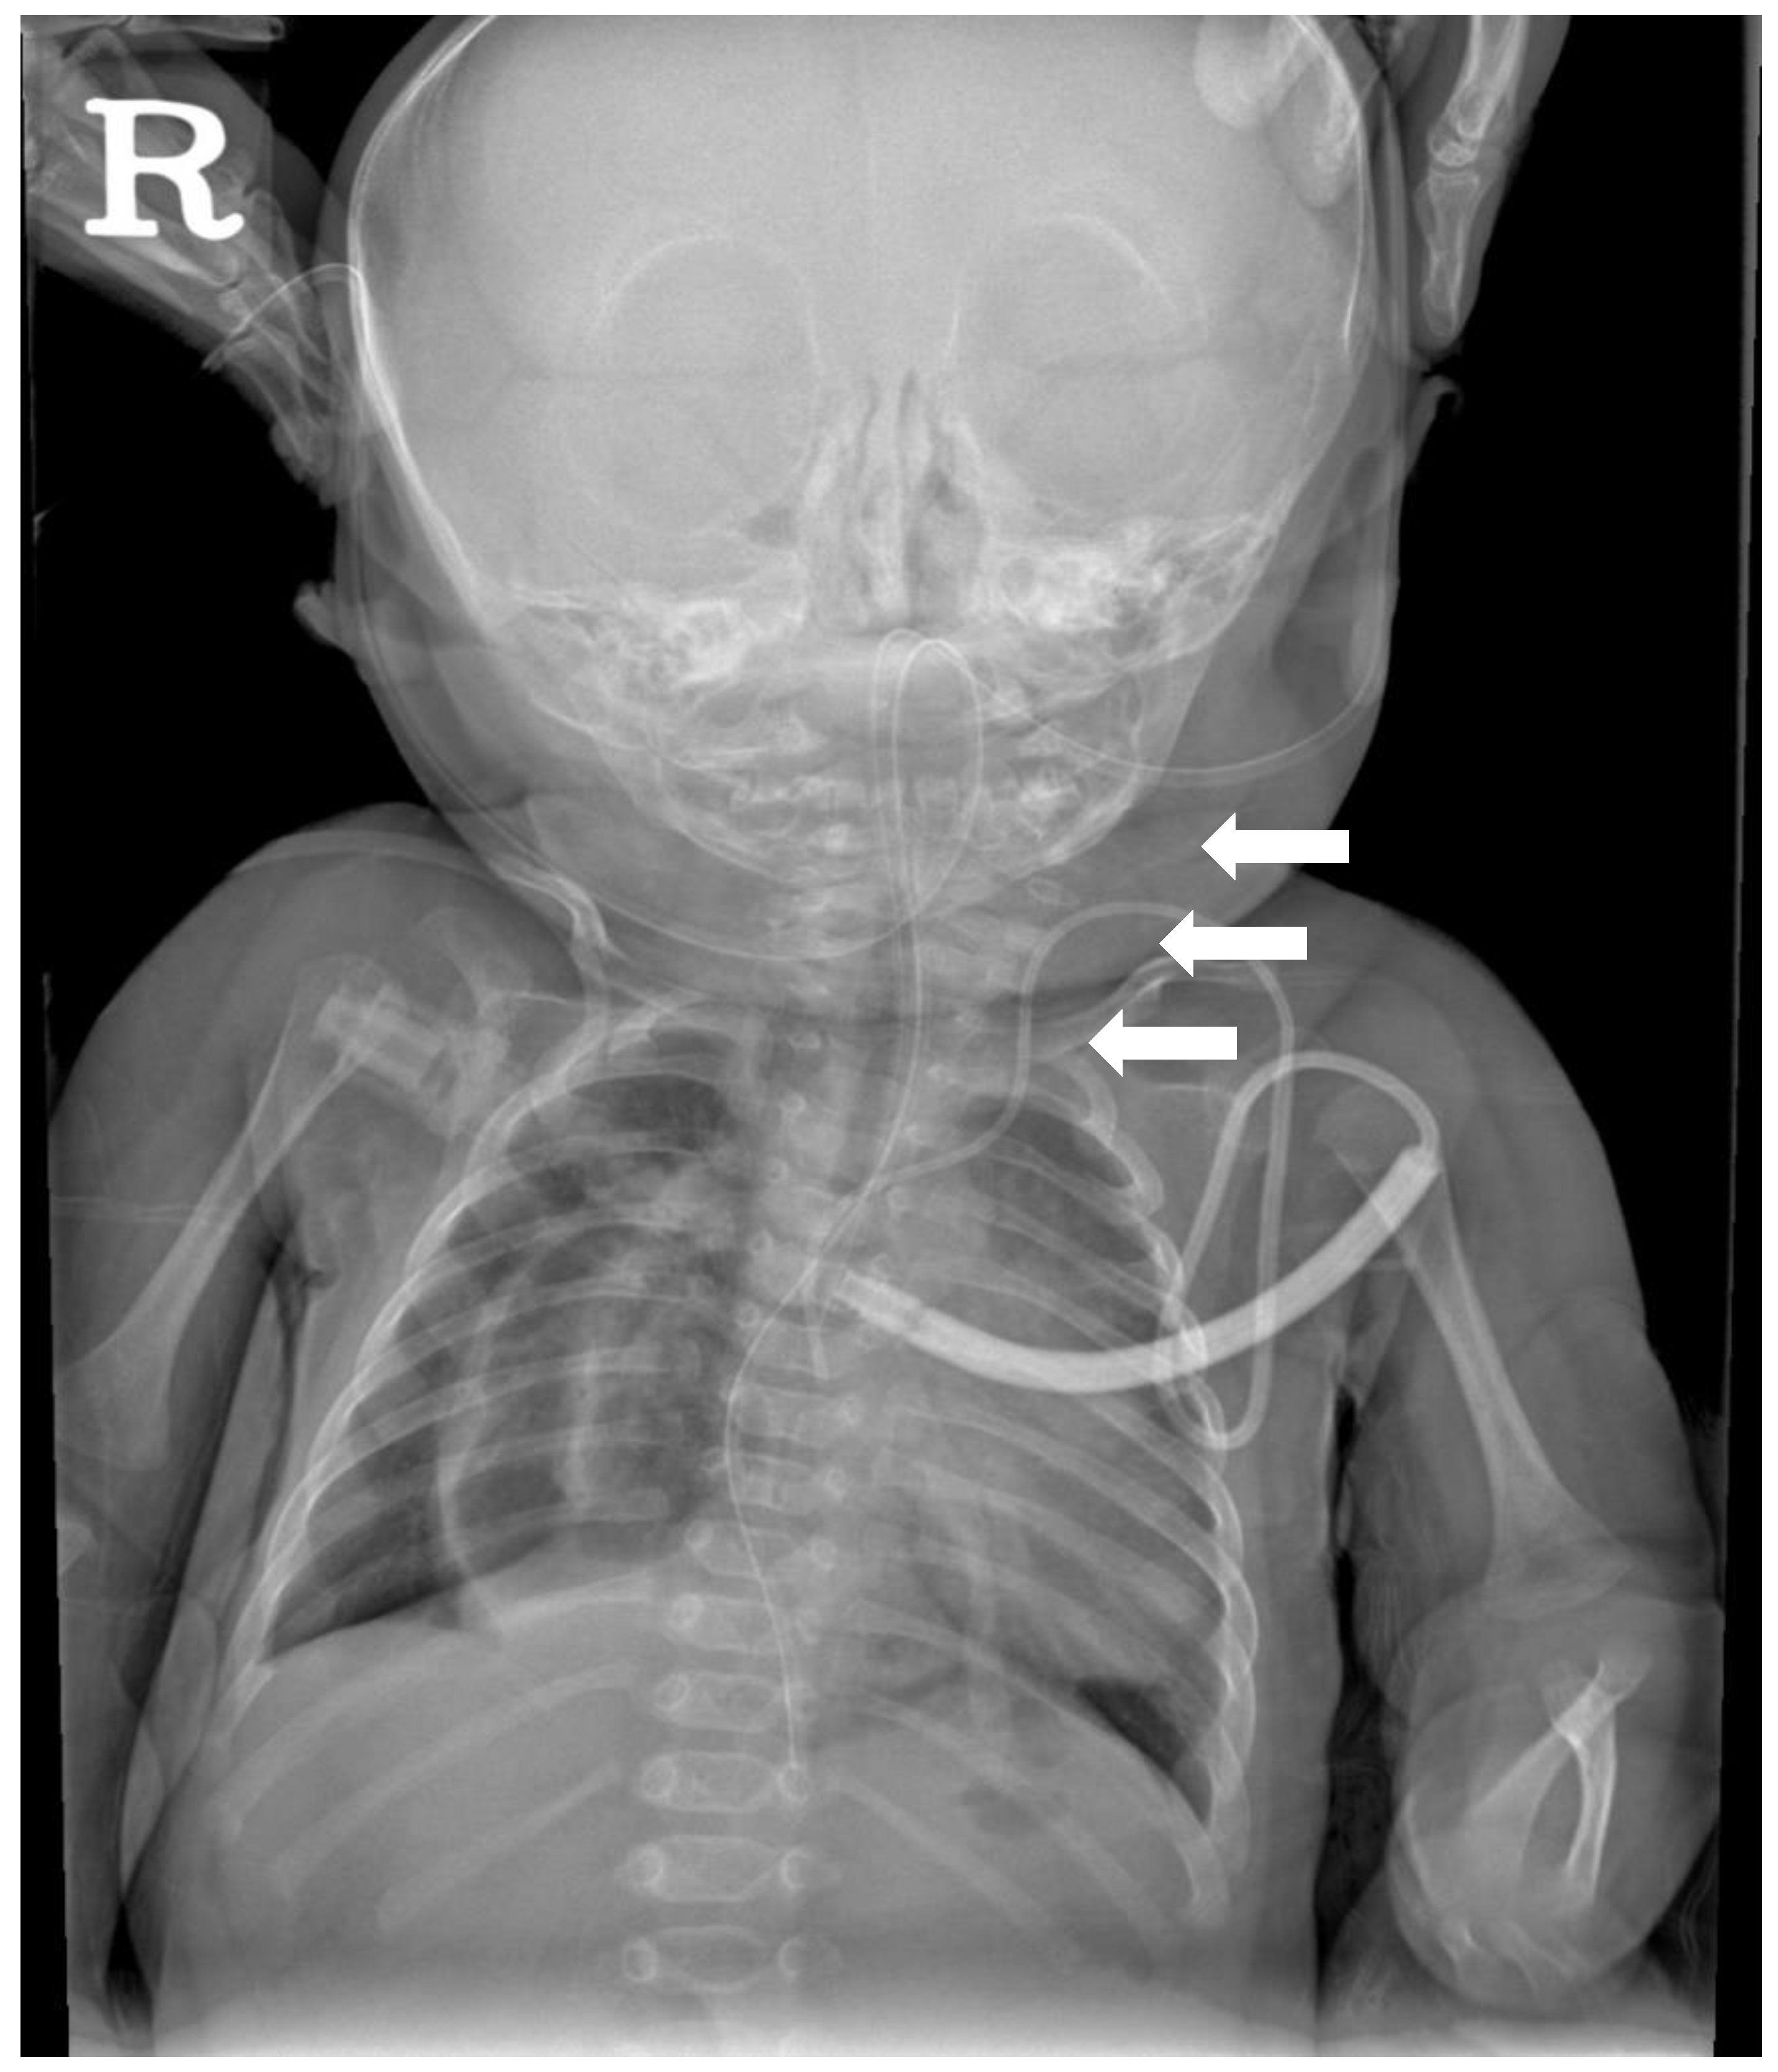 Children Free Full-Text An Unusual Case of Torticollis Split Cord Malformation with Vertebral Fusion Anomaly A Case Report and a Review of the Literature